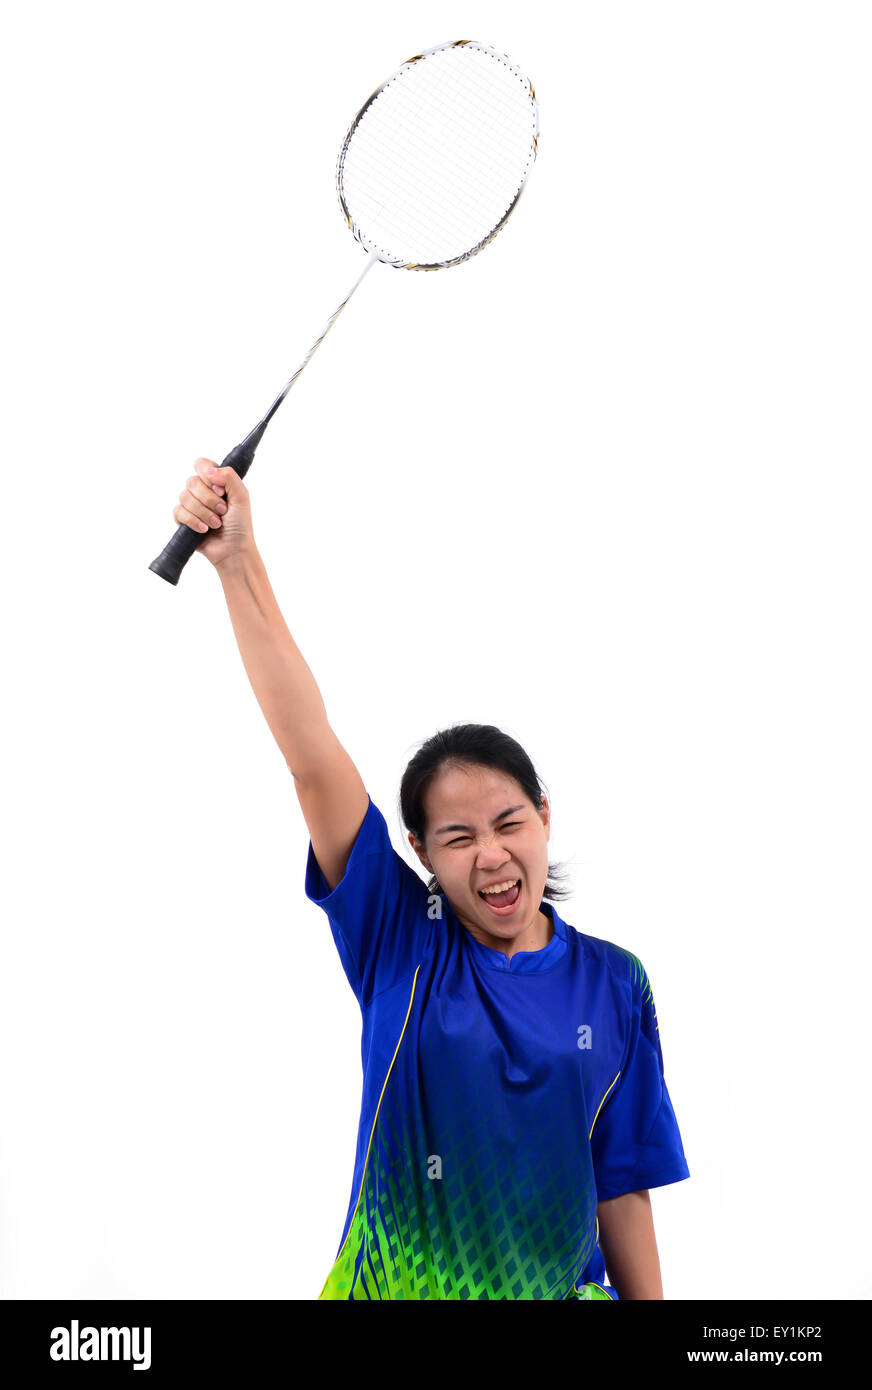 badminton player in action isolated on white background Stock Photo - Alamy